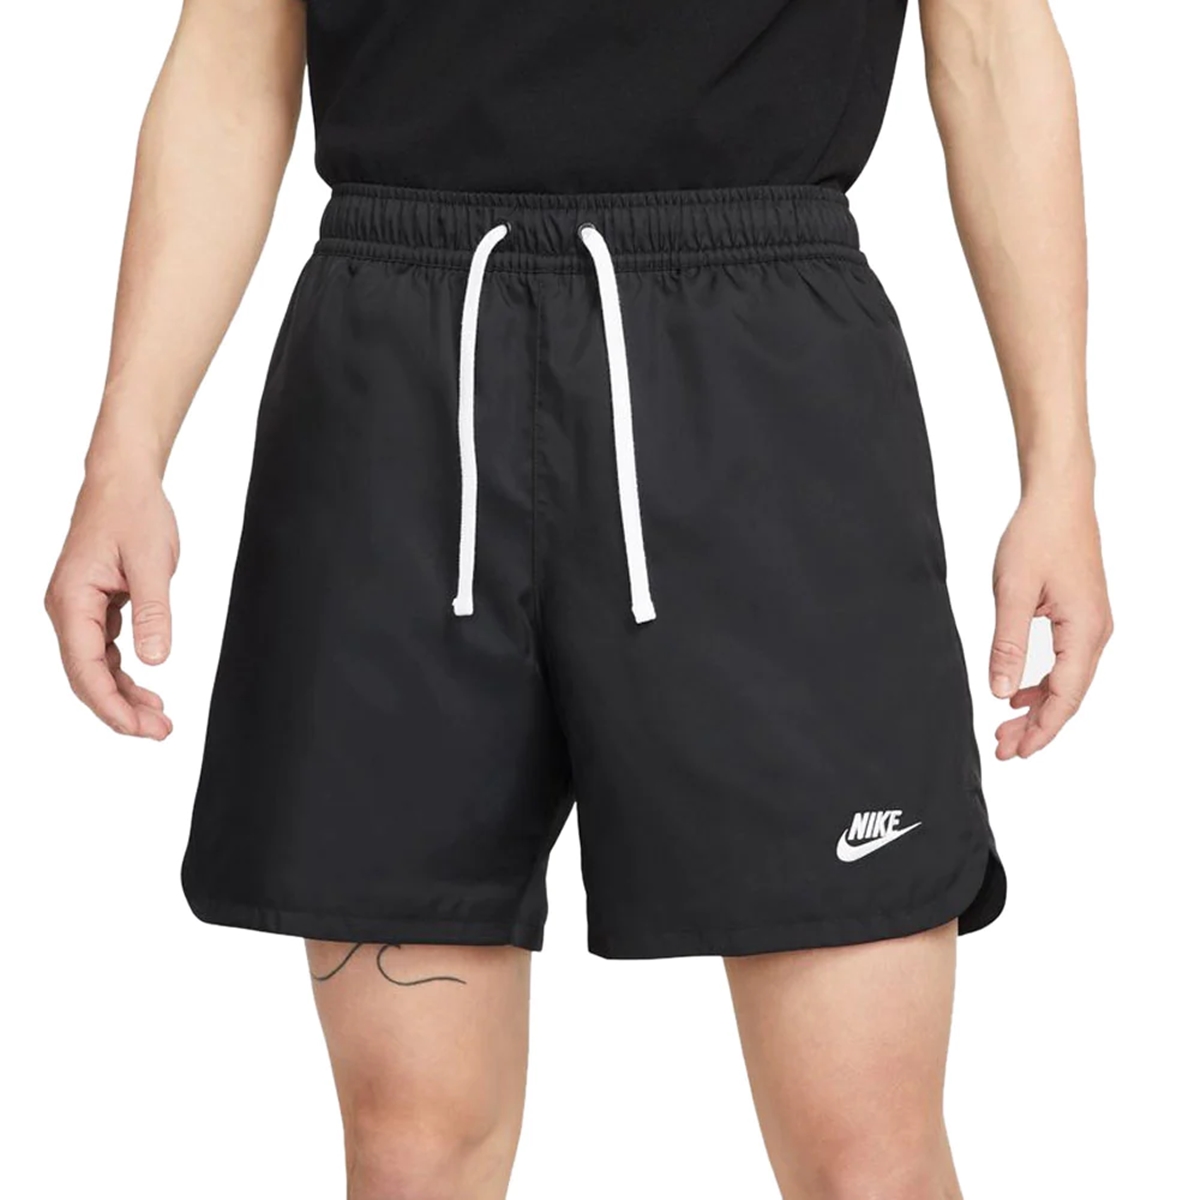 9 Incredible Nike Men’s Athletic Shorts For 2023